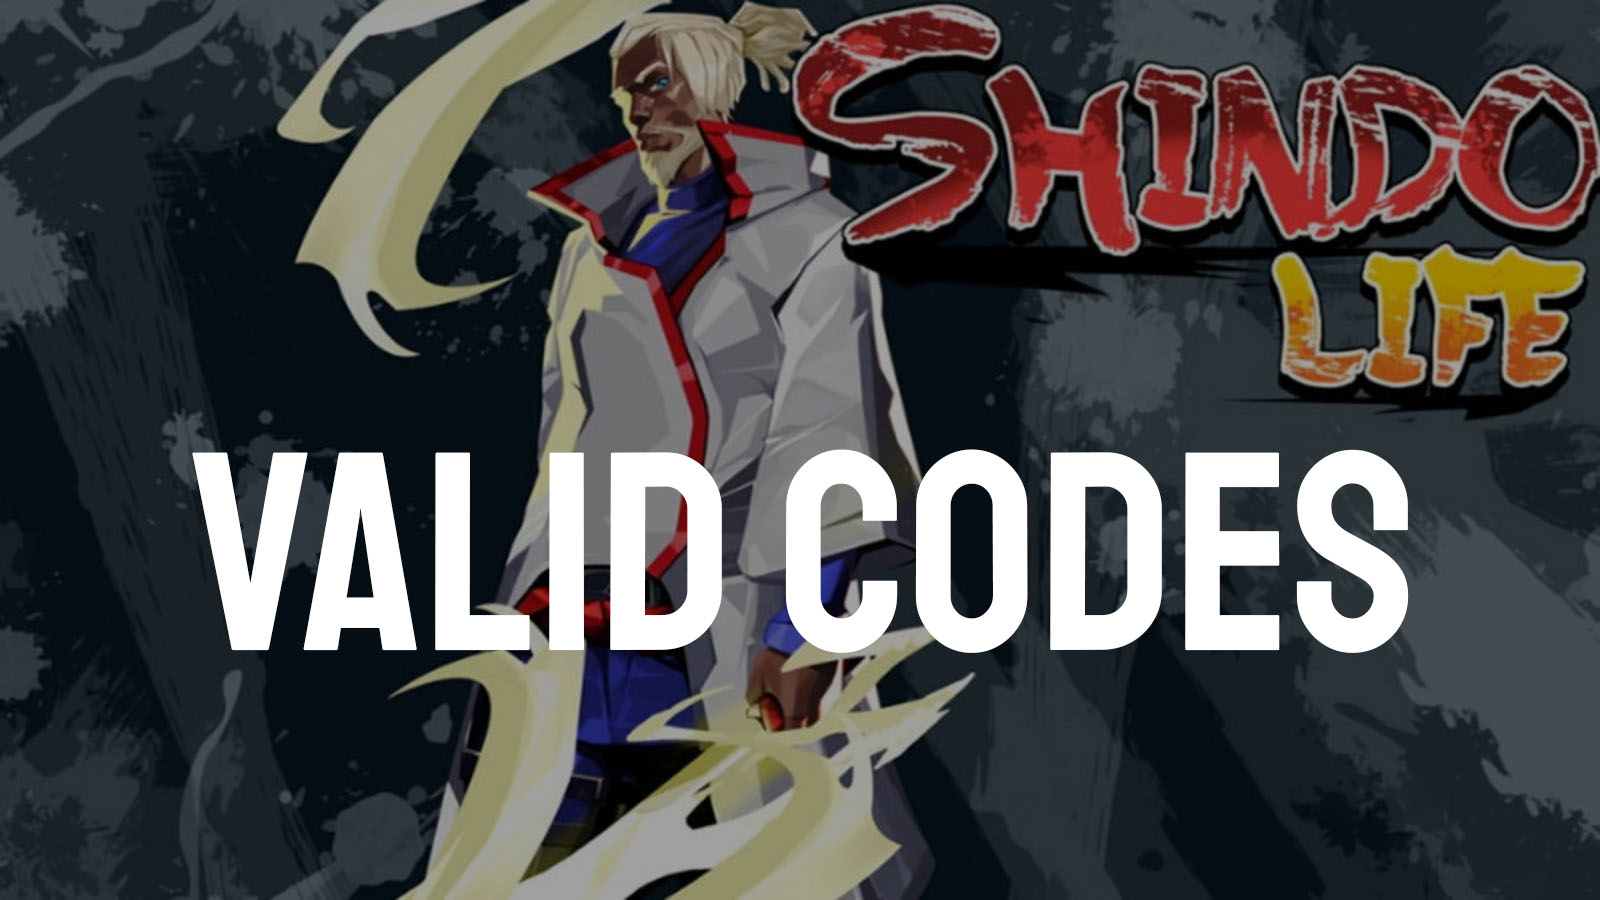 Latest Shindo Life Codes for Free Spins and Coins (Updated Daily)